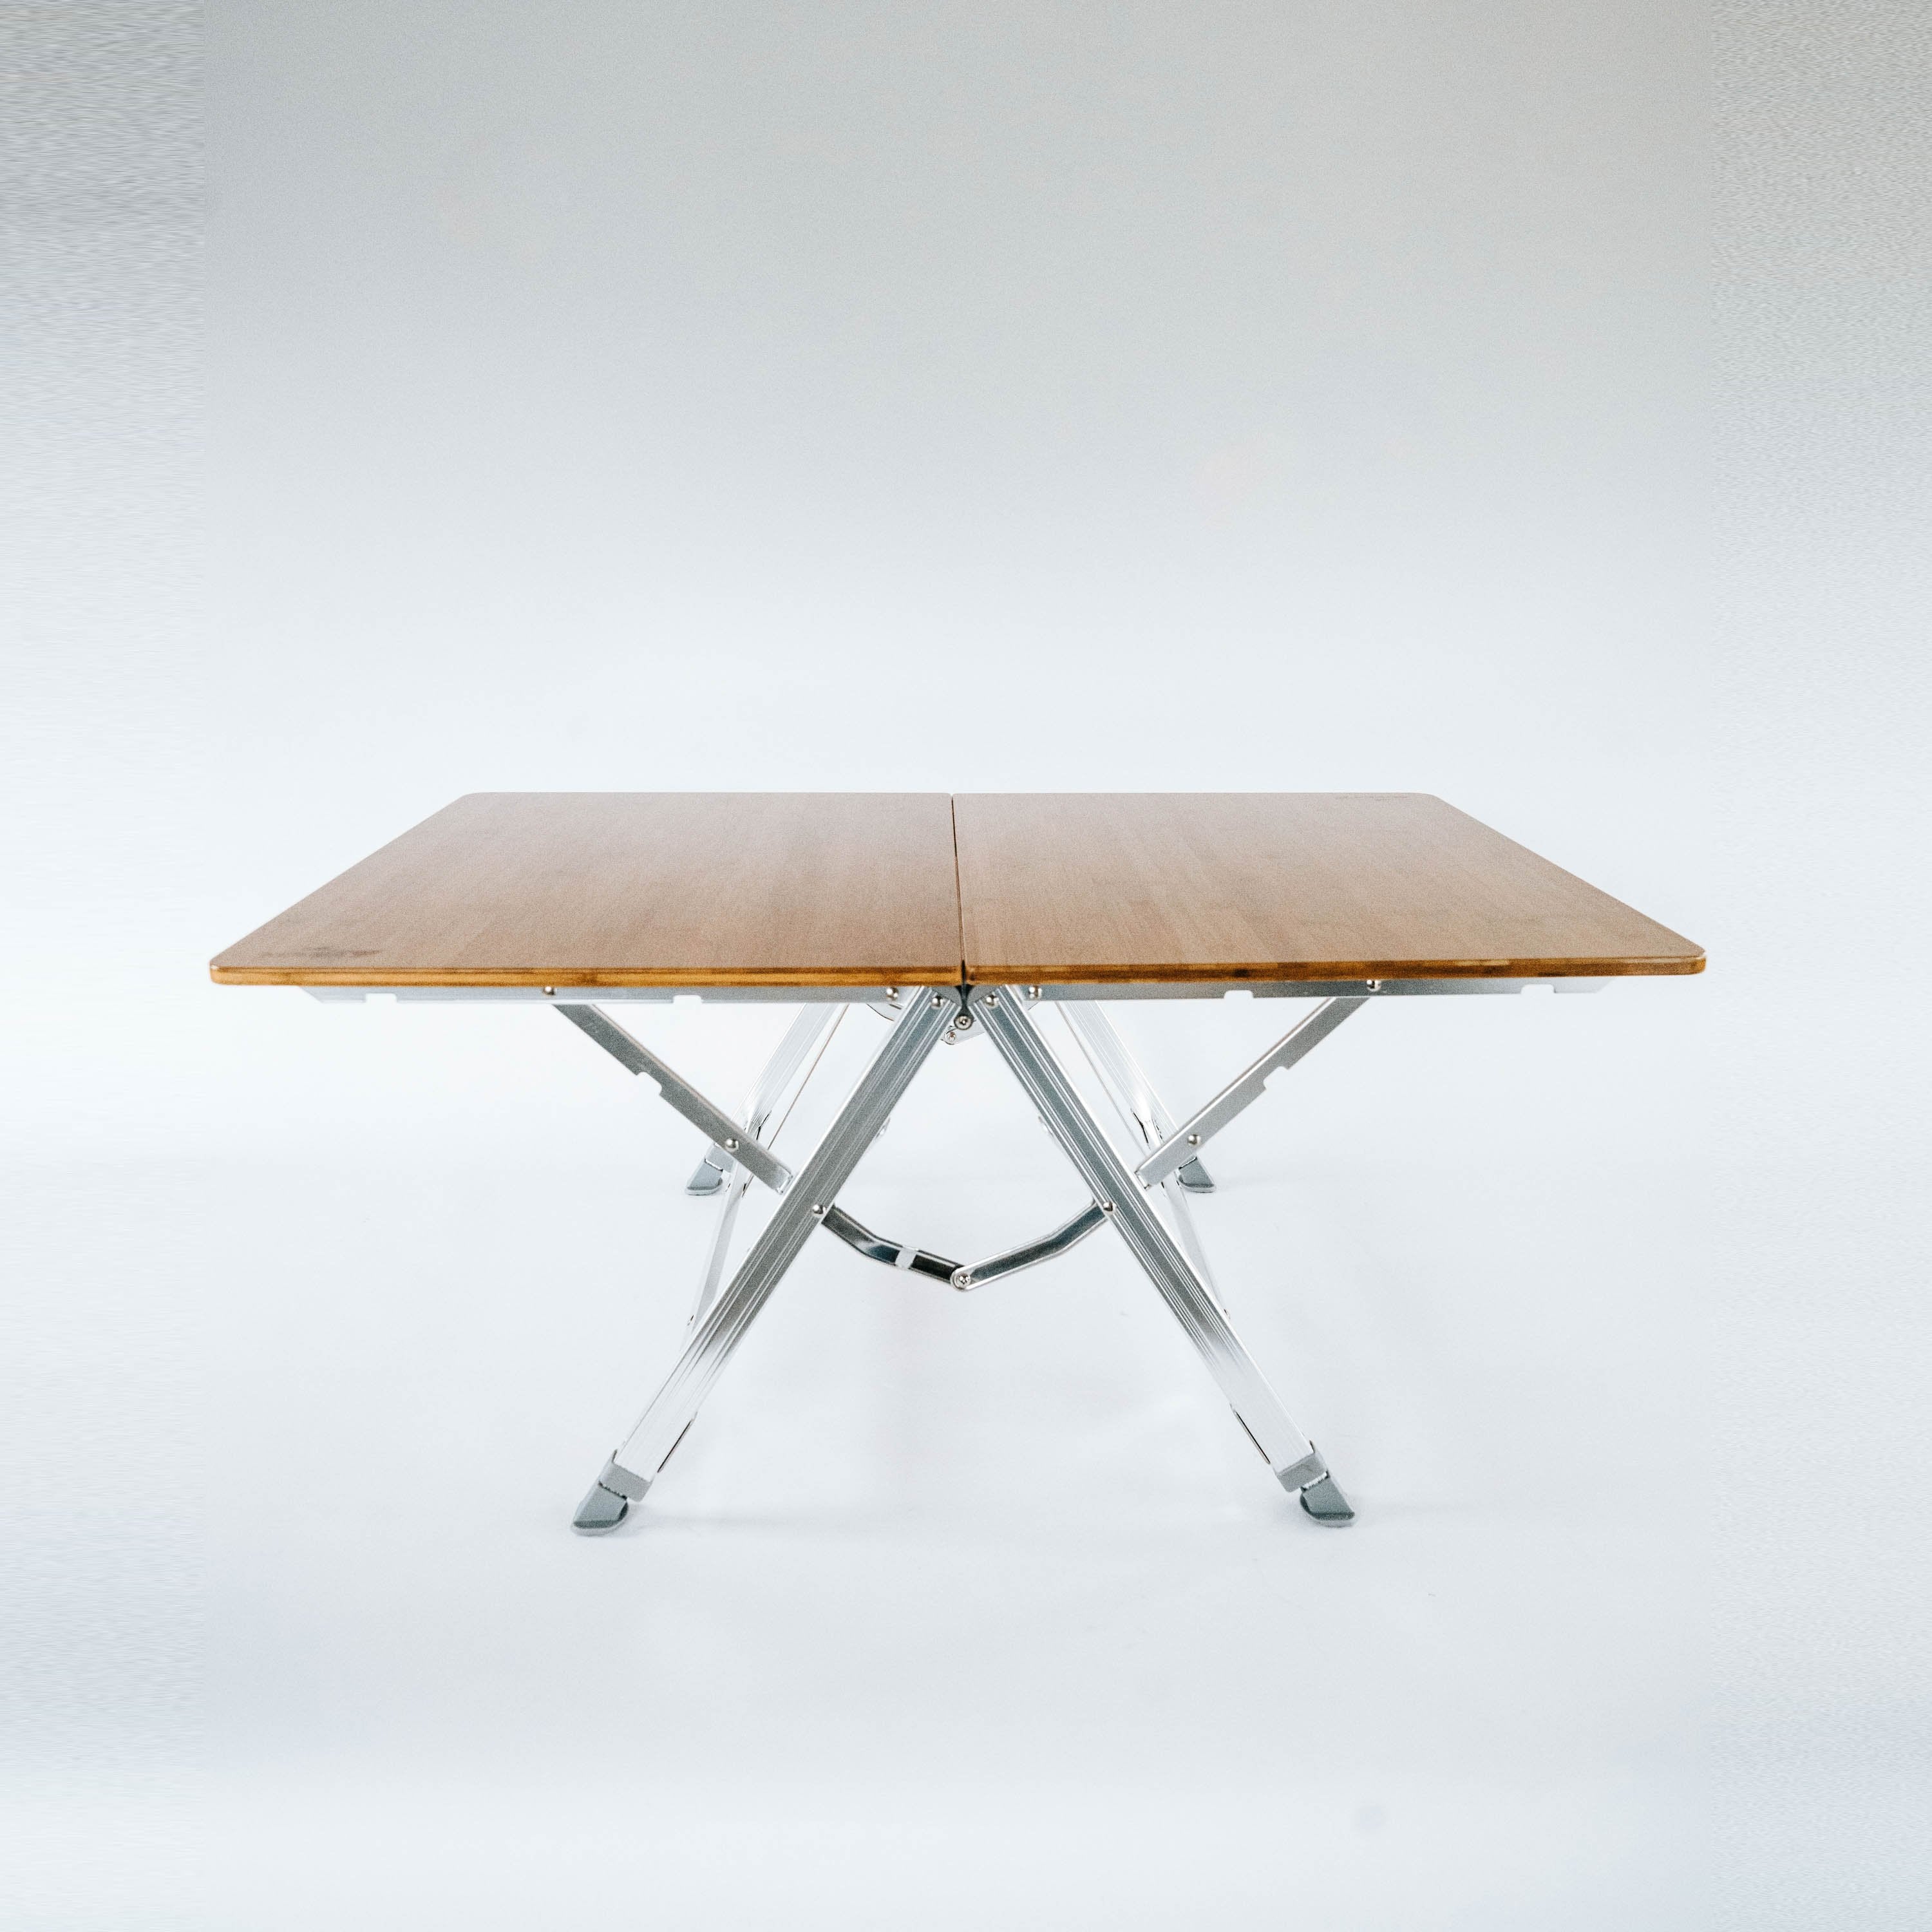 AL Bamboo One Action Table (L)